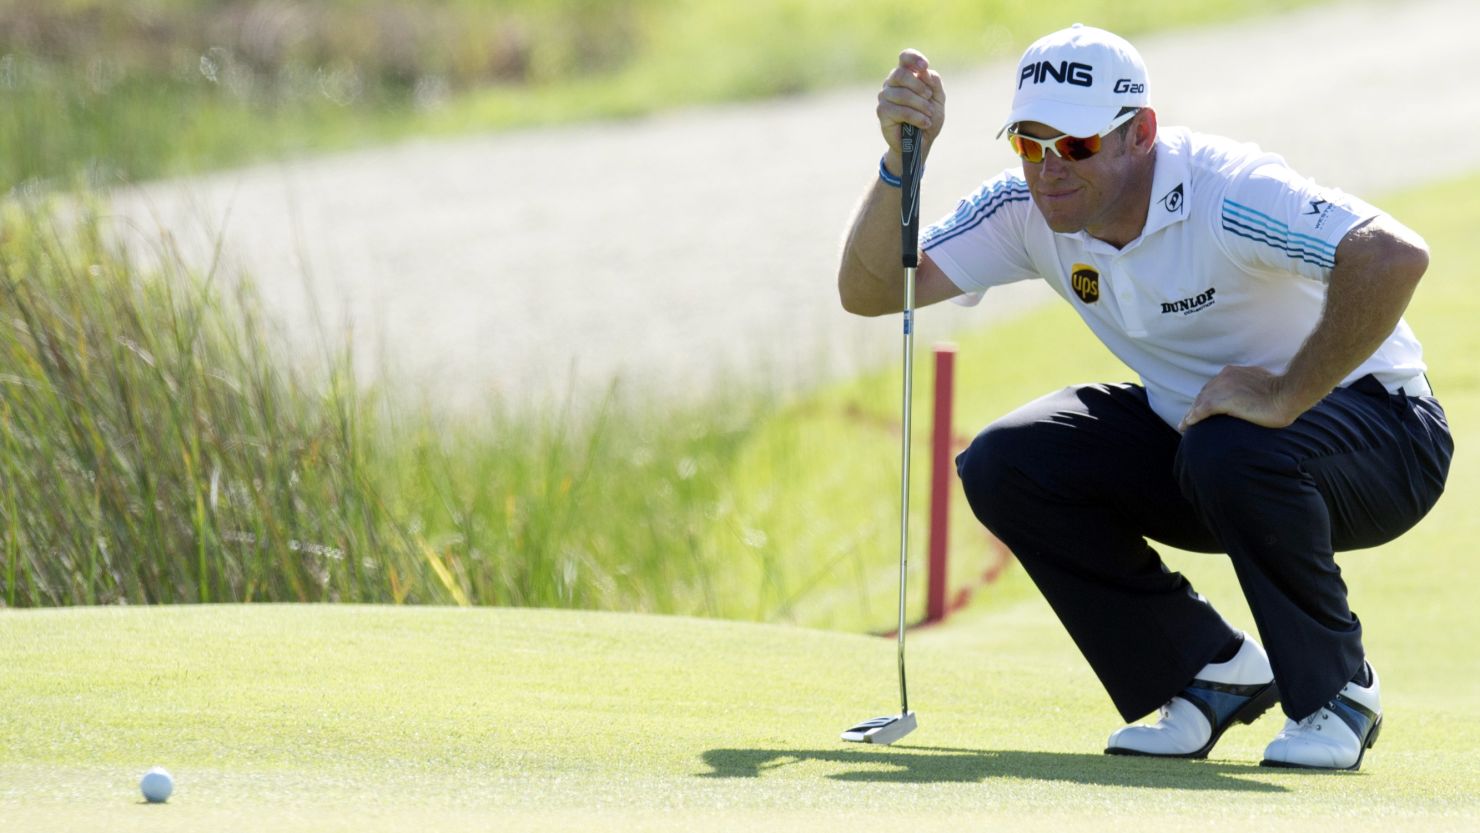 Lee Westwood lines up a putt during a disappointing first round of 75 at Kiawah Island's Ocean Course.